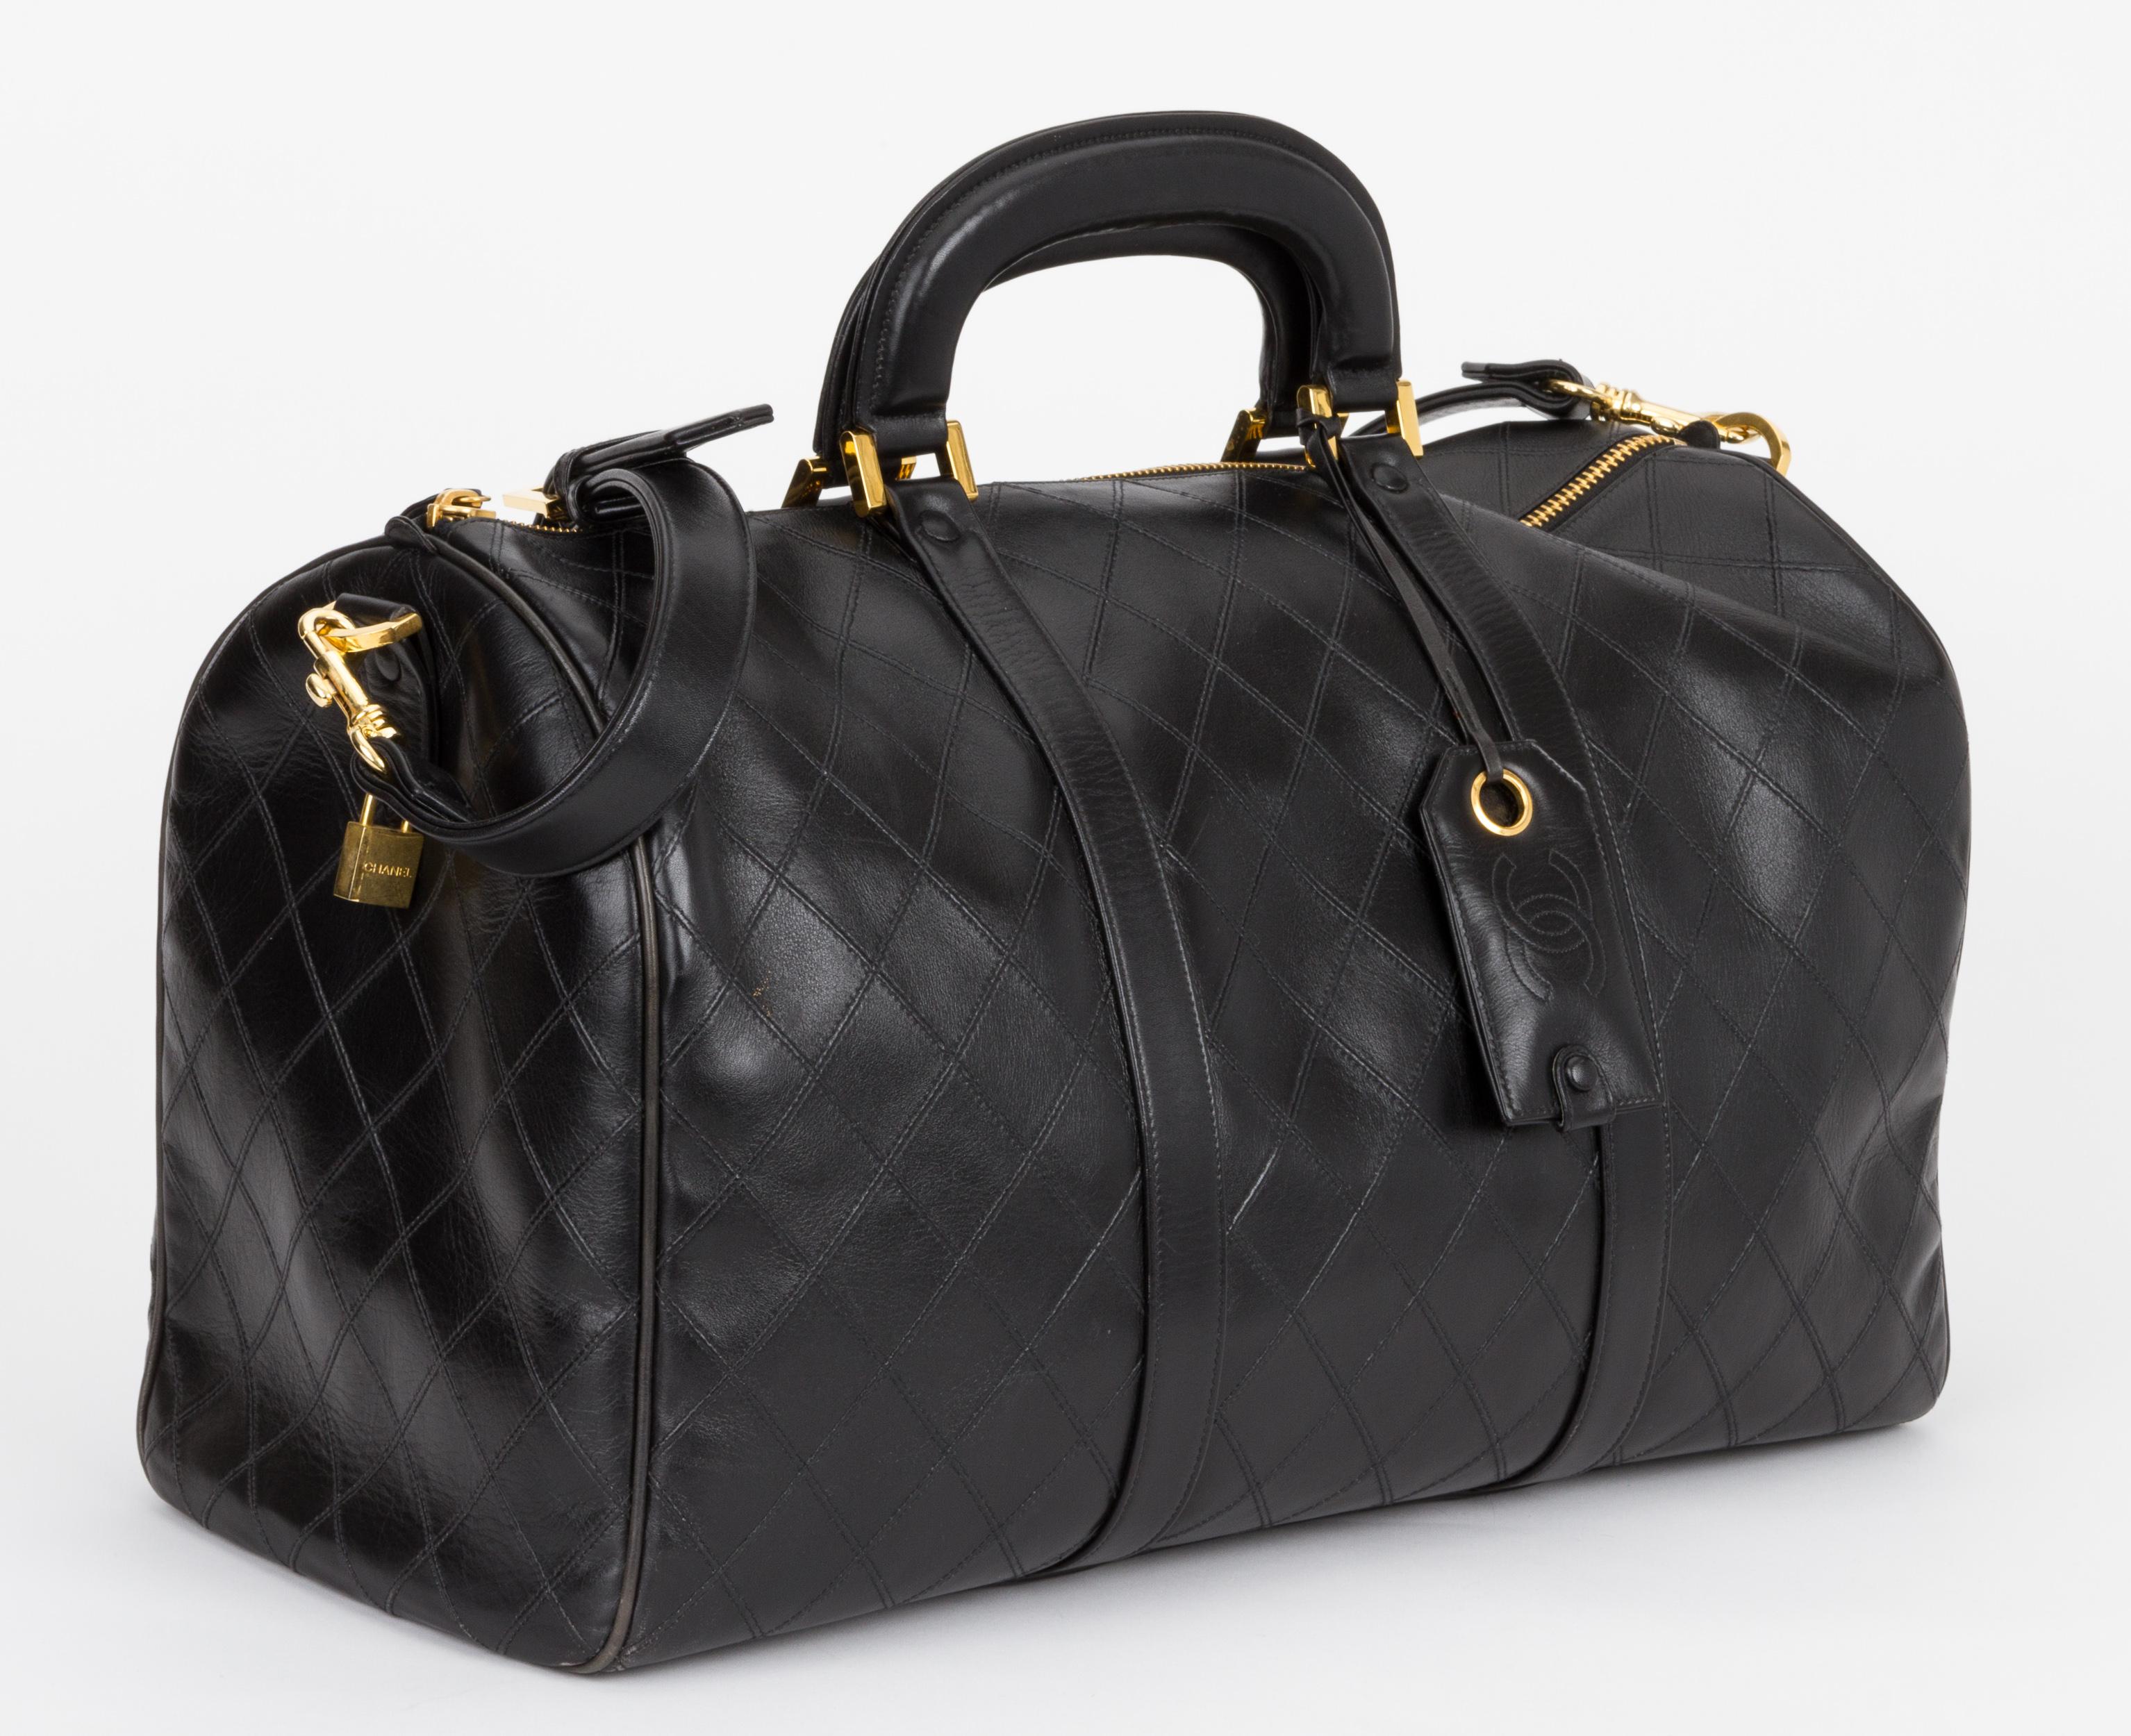 Chanel rare diamond quilting unisex black duffle bag with gold tone hardware. Handle drop 5